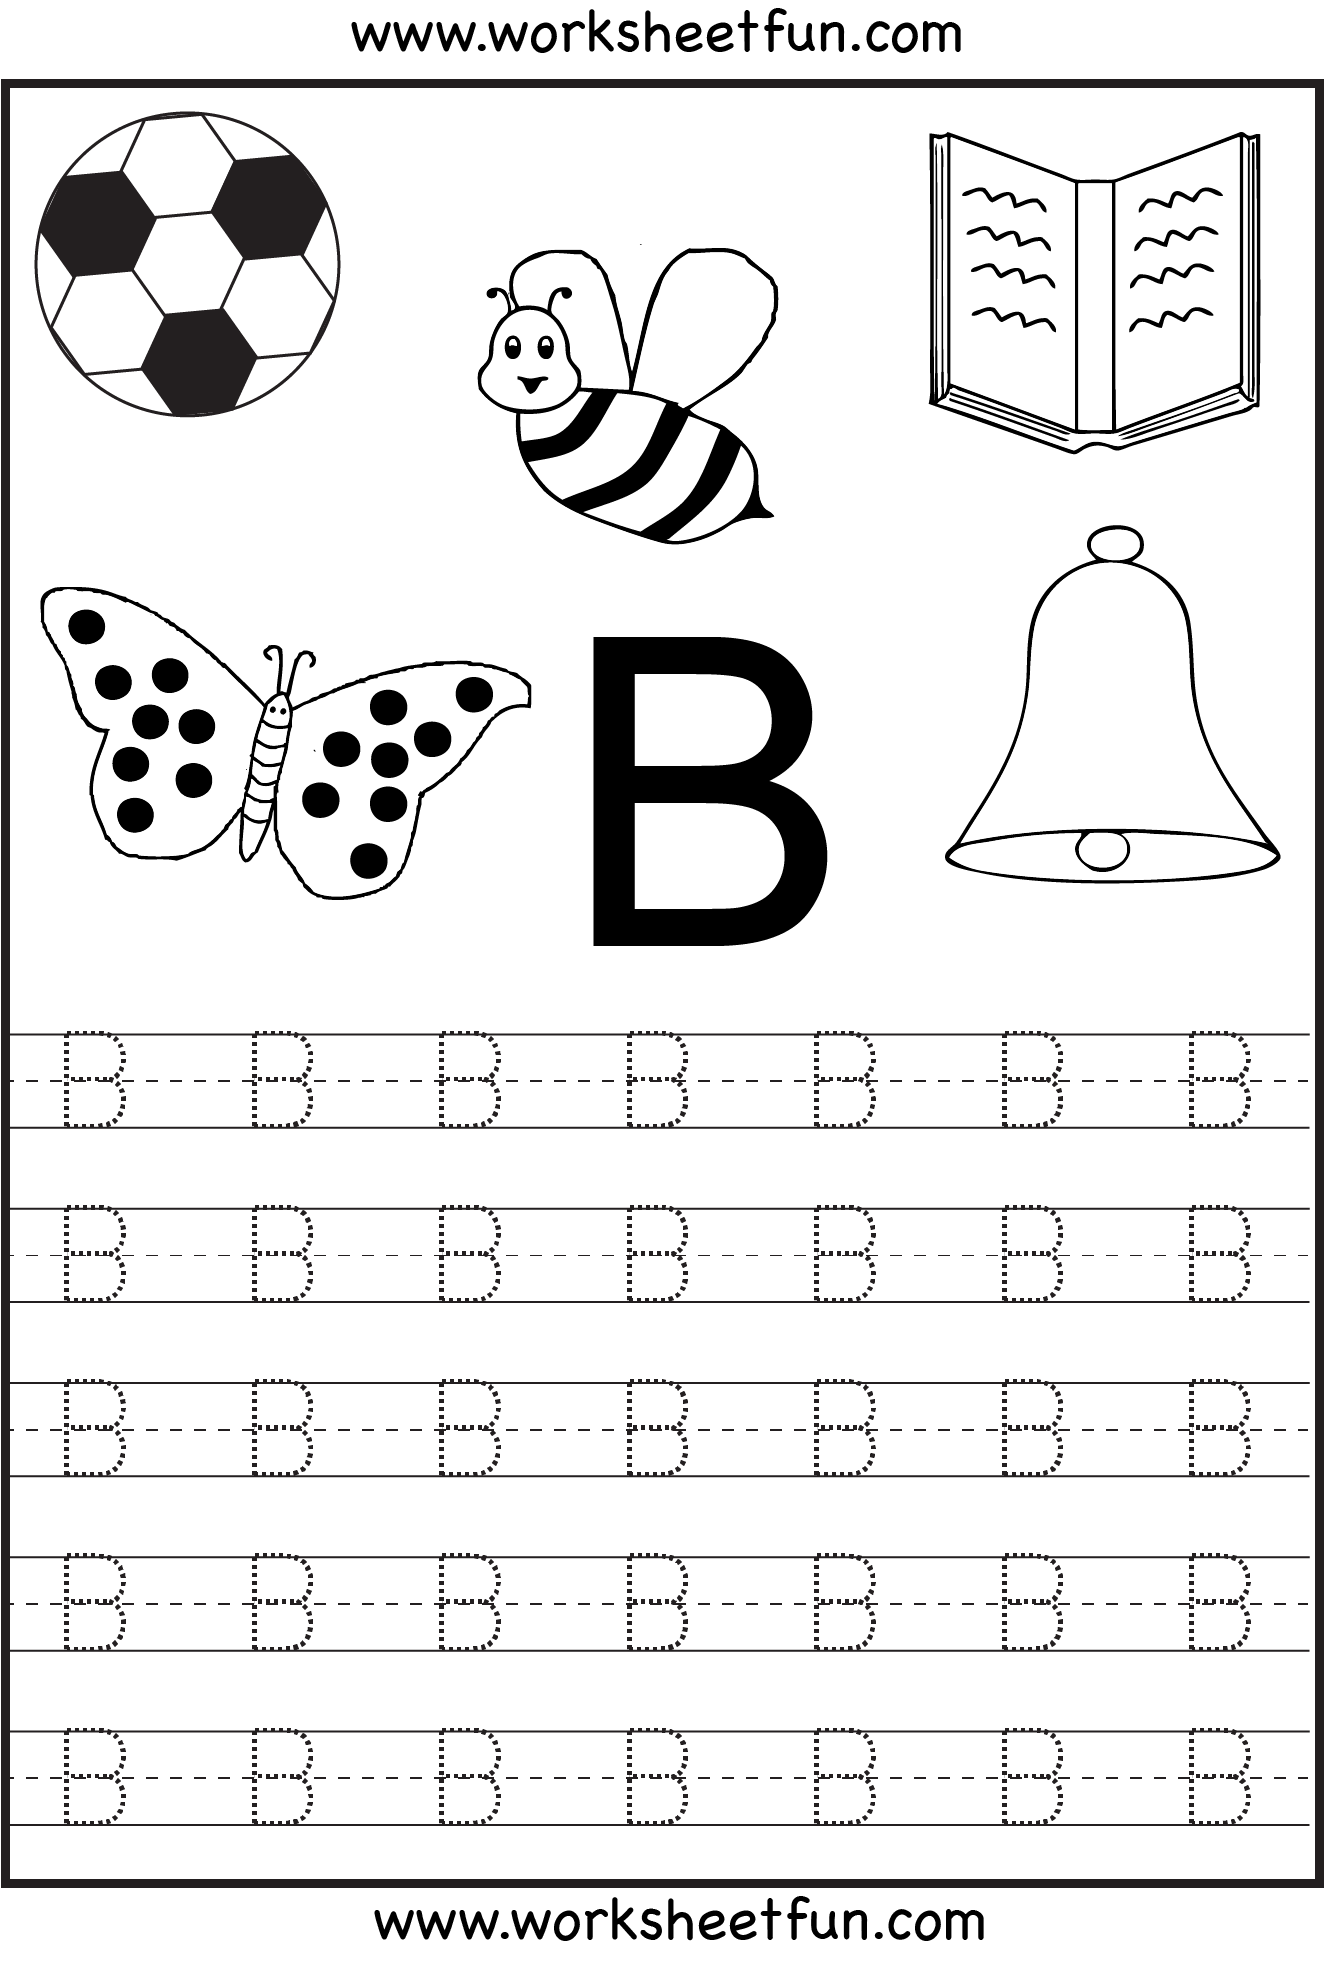 free-printable-preschool-worksheets-tracing-letters-thankyou-letter